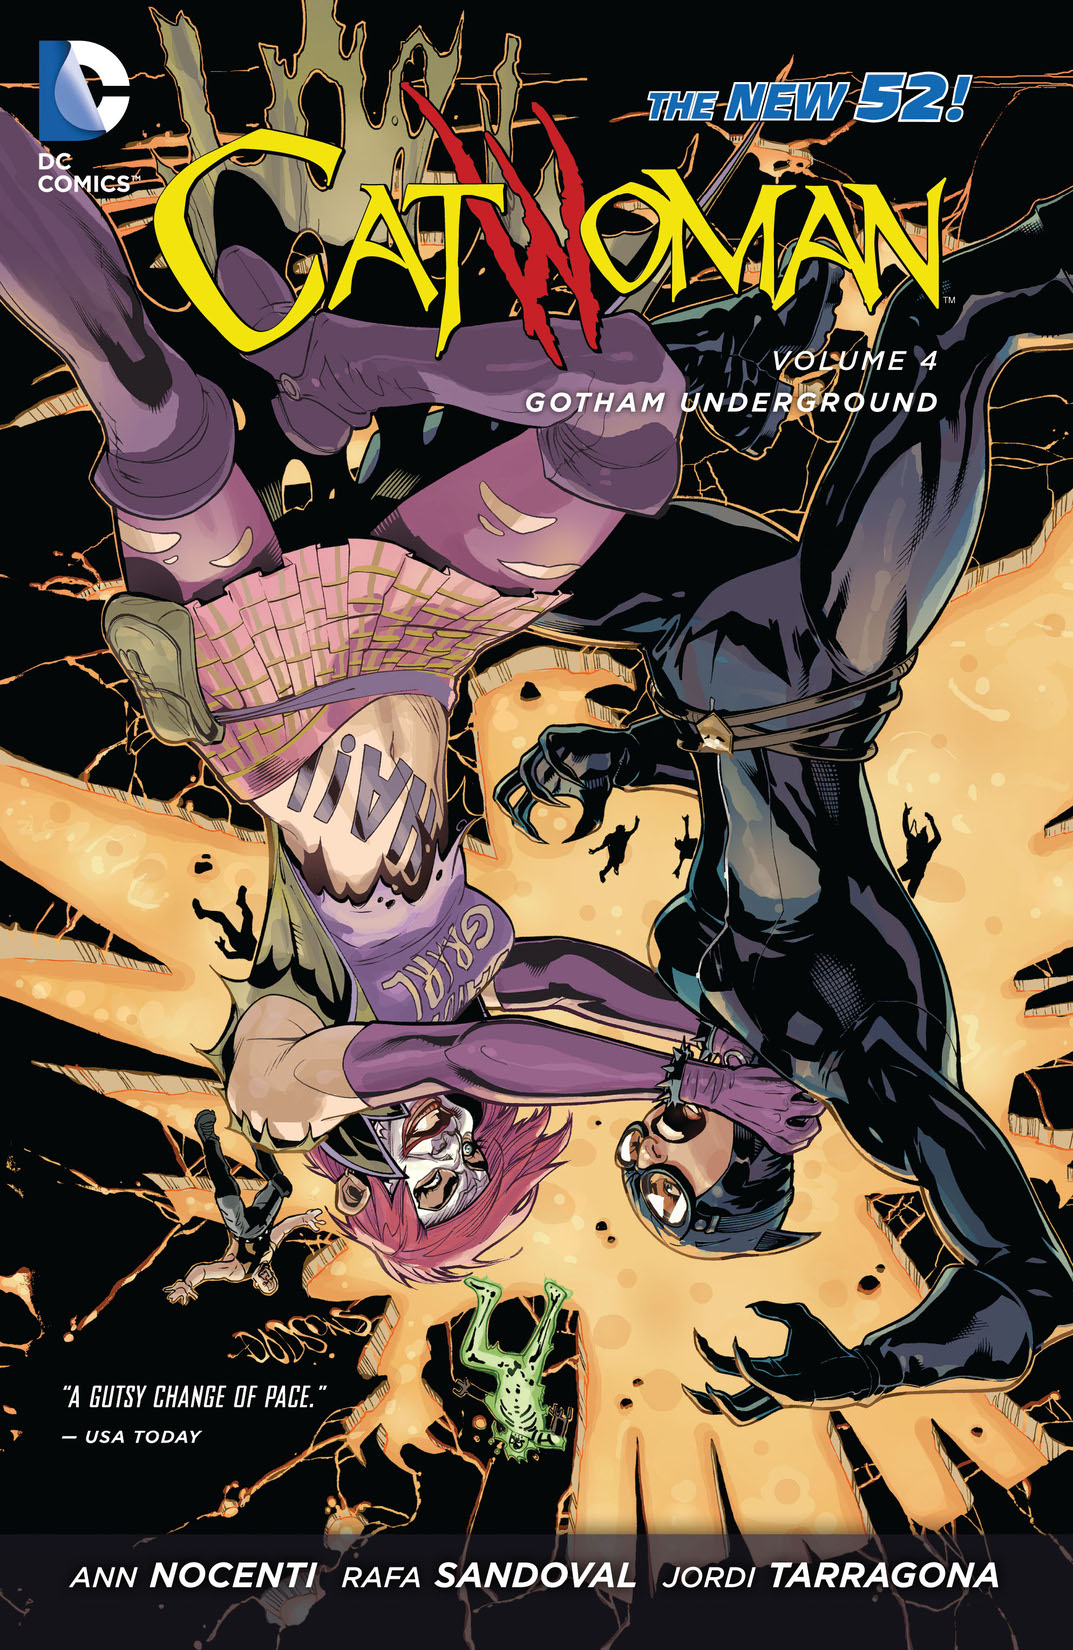 Catwoman Vol. 4: Gotham Underground preview images